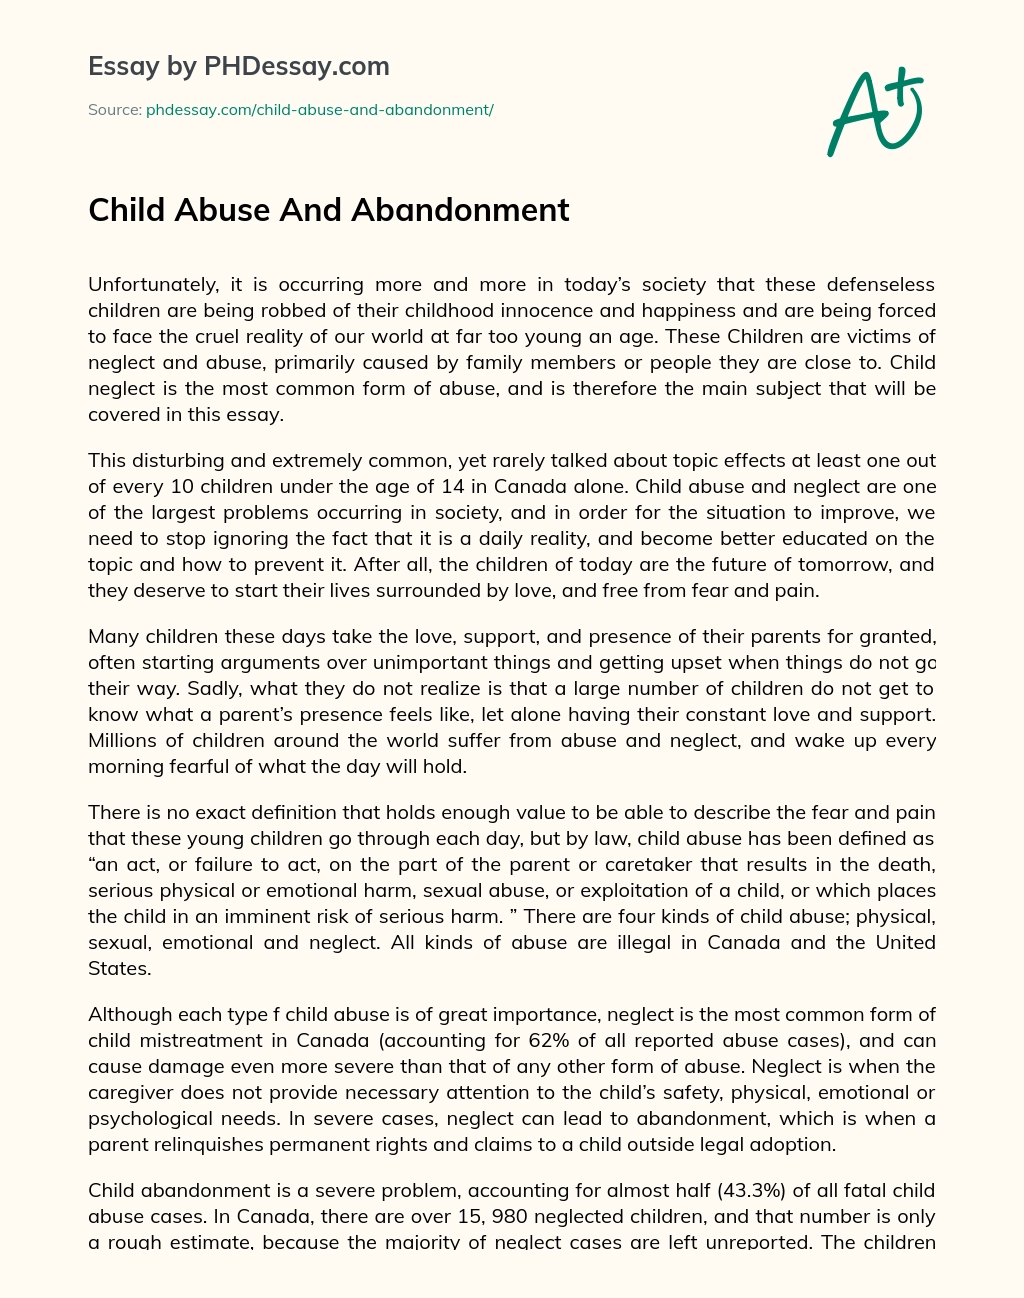 Child Abuse And Abandonment essay